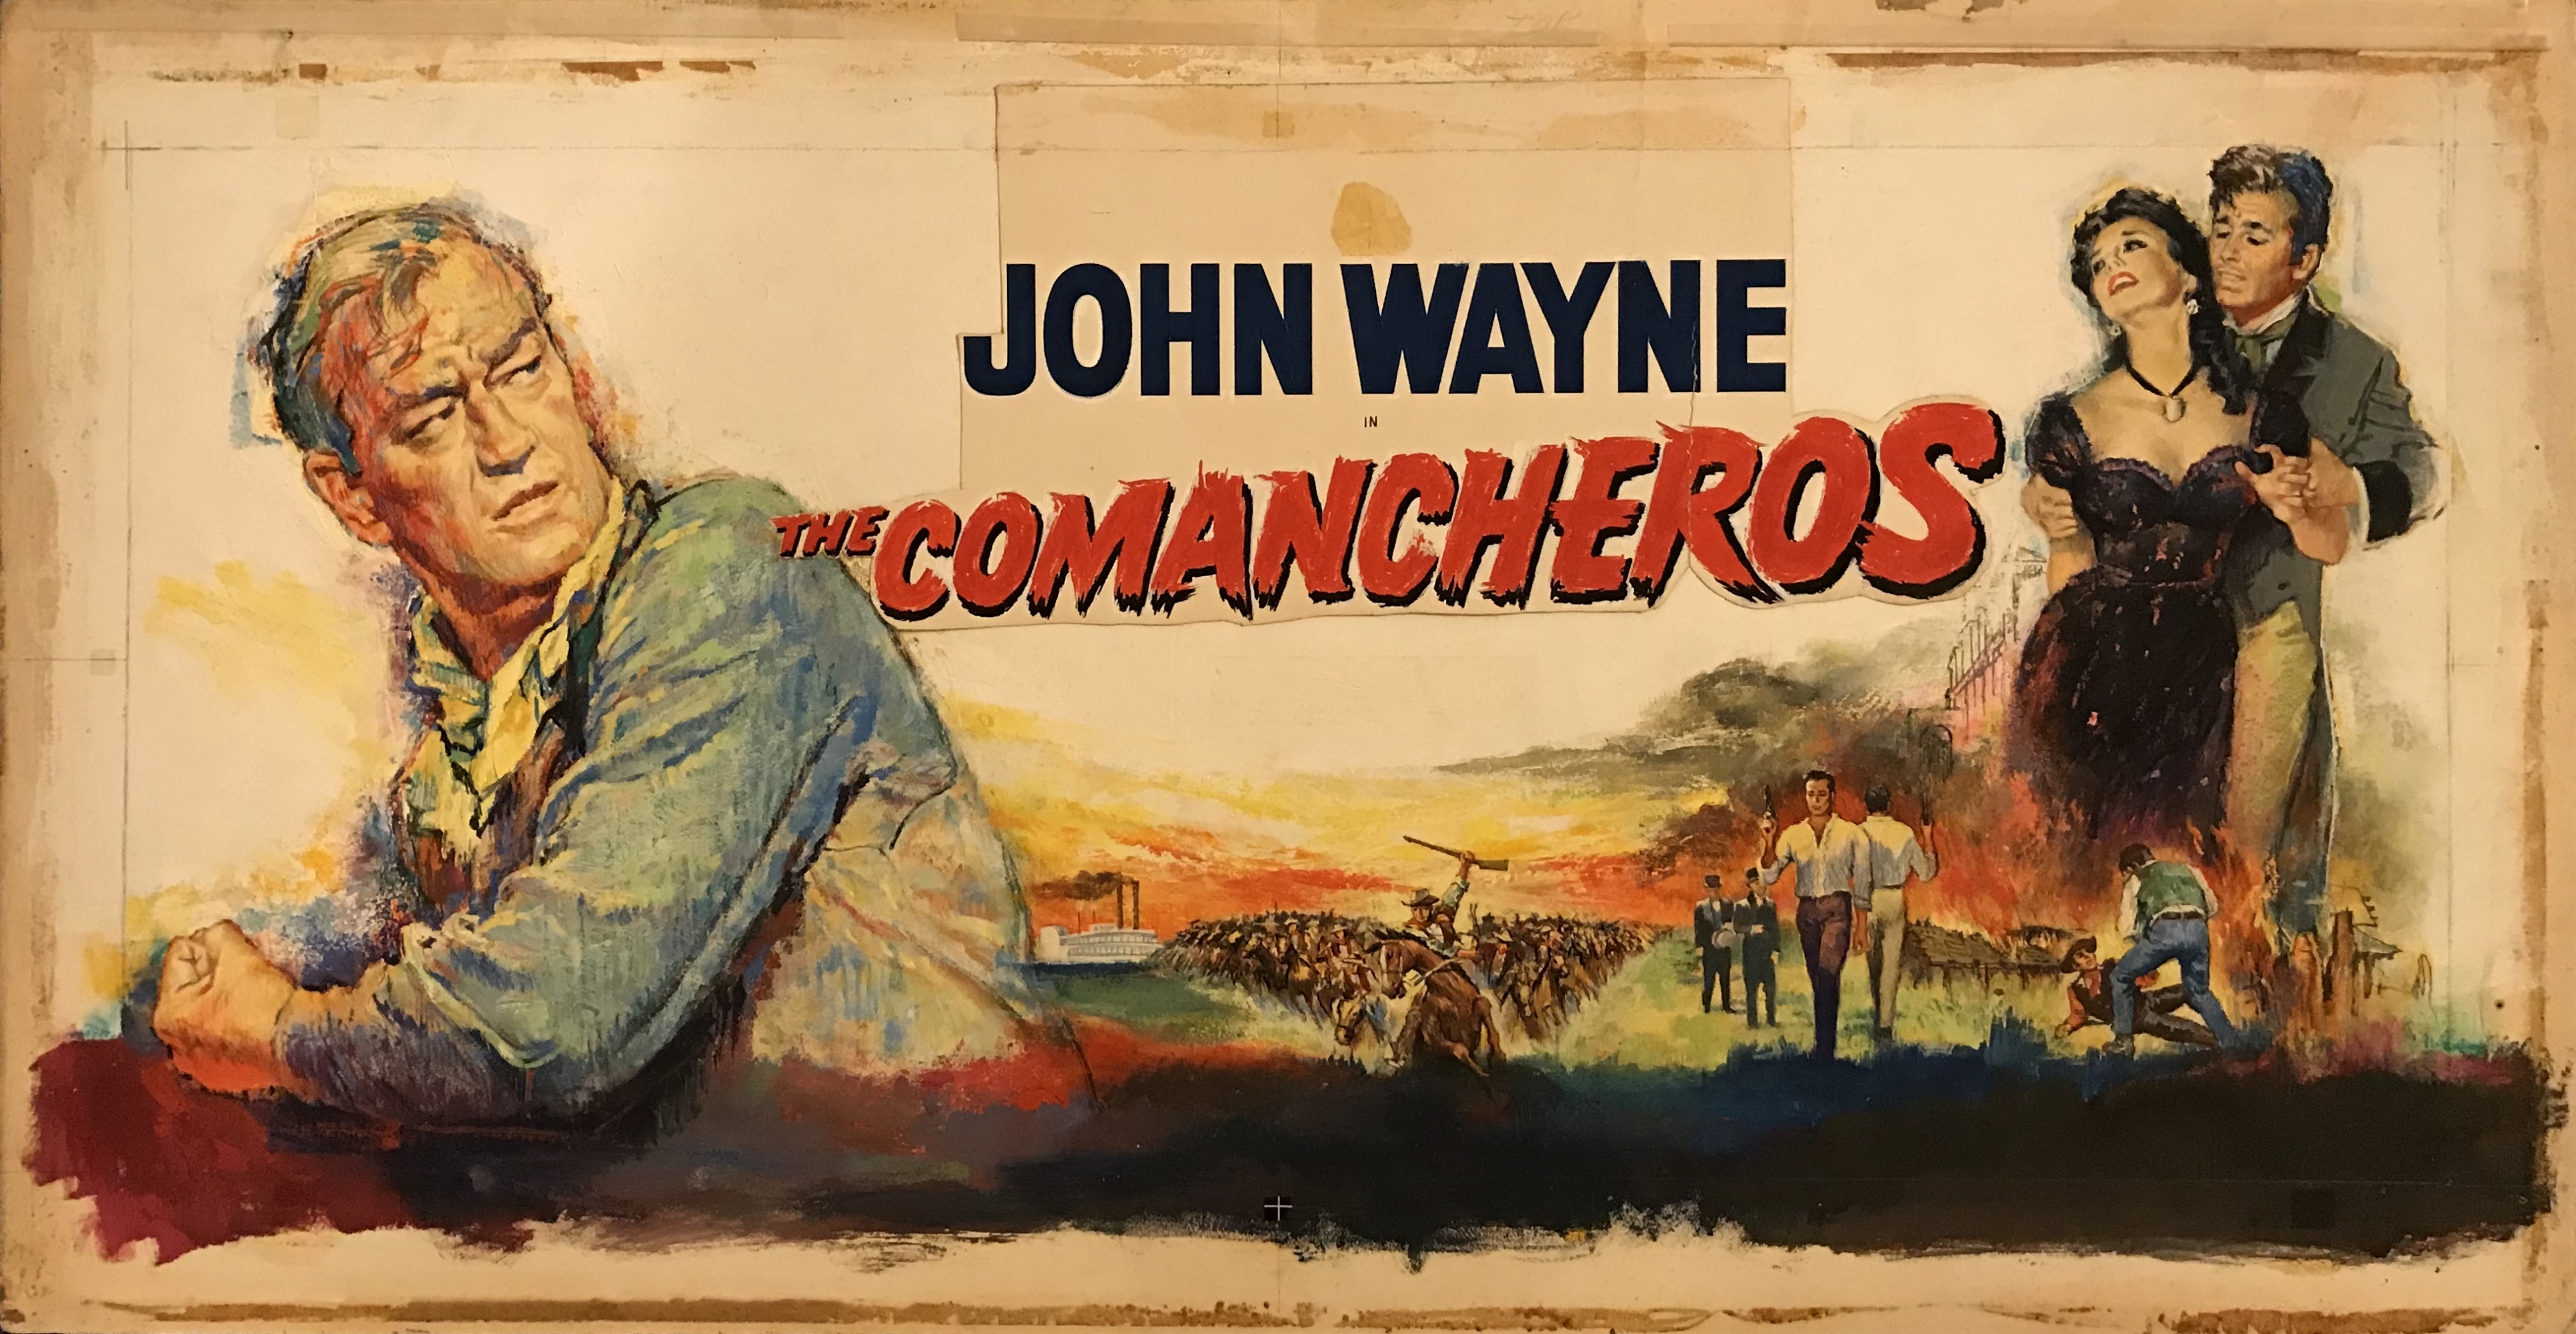 The Comancheros by Howard Terpning, 1961